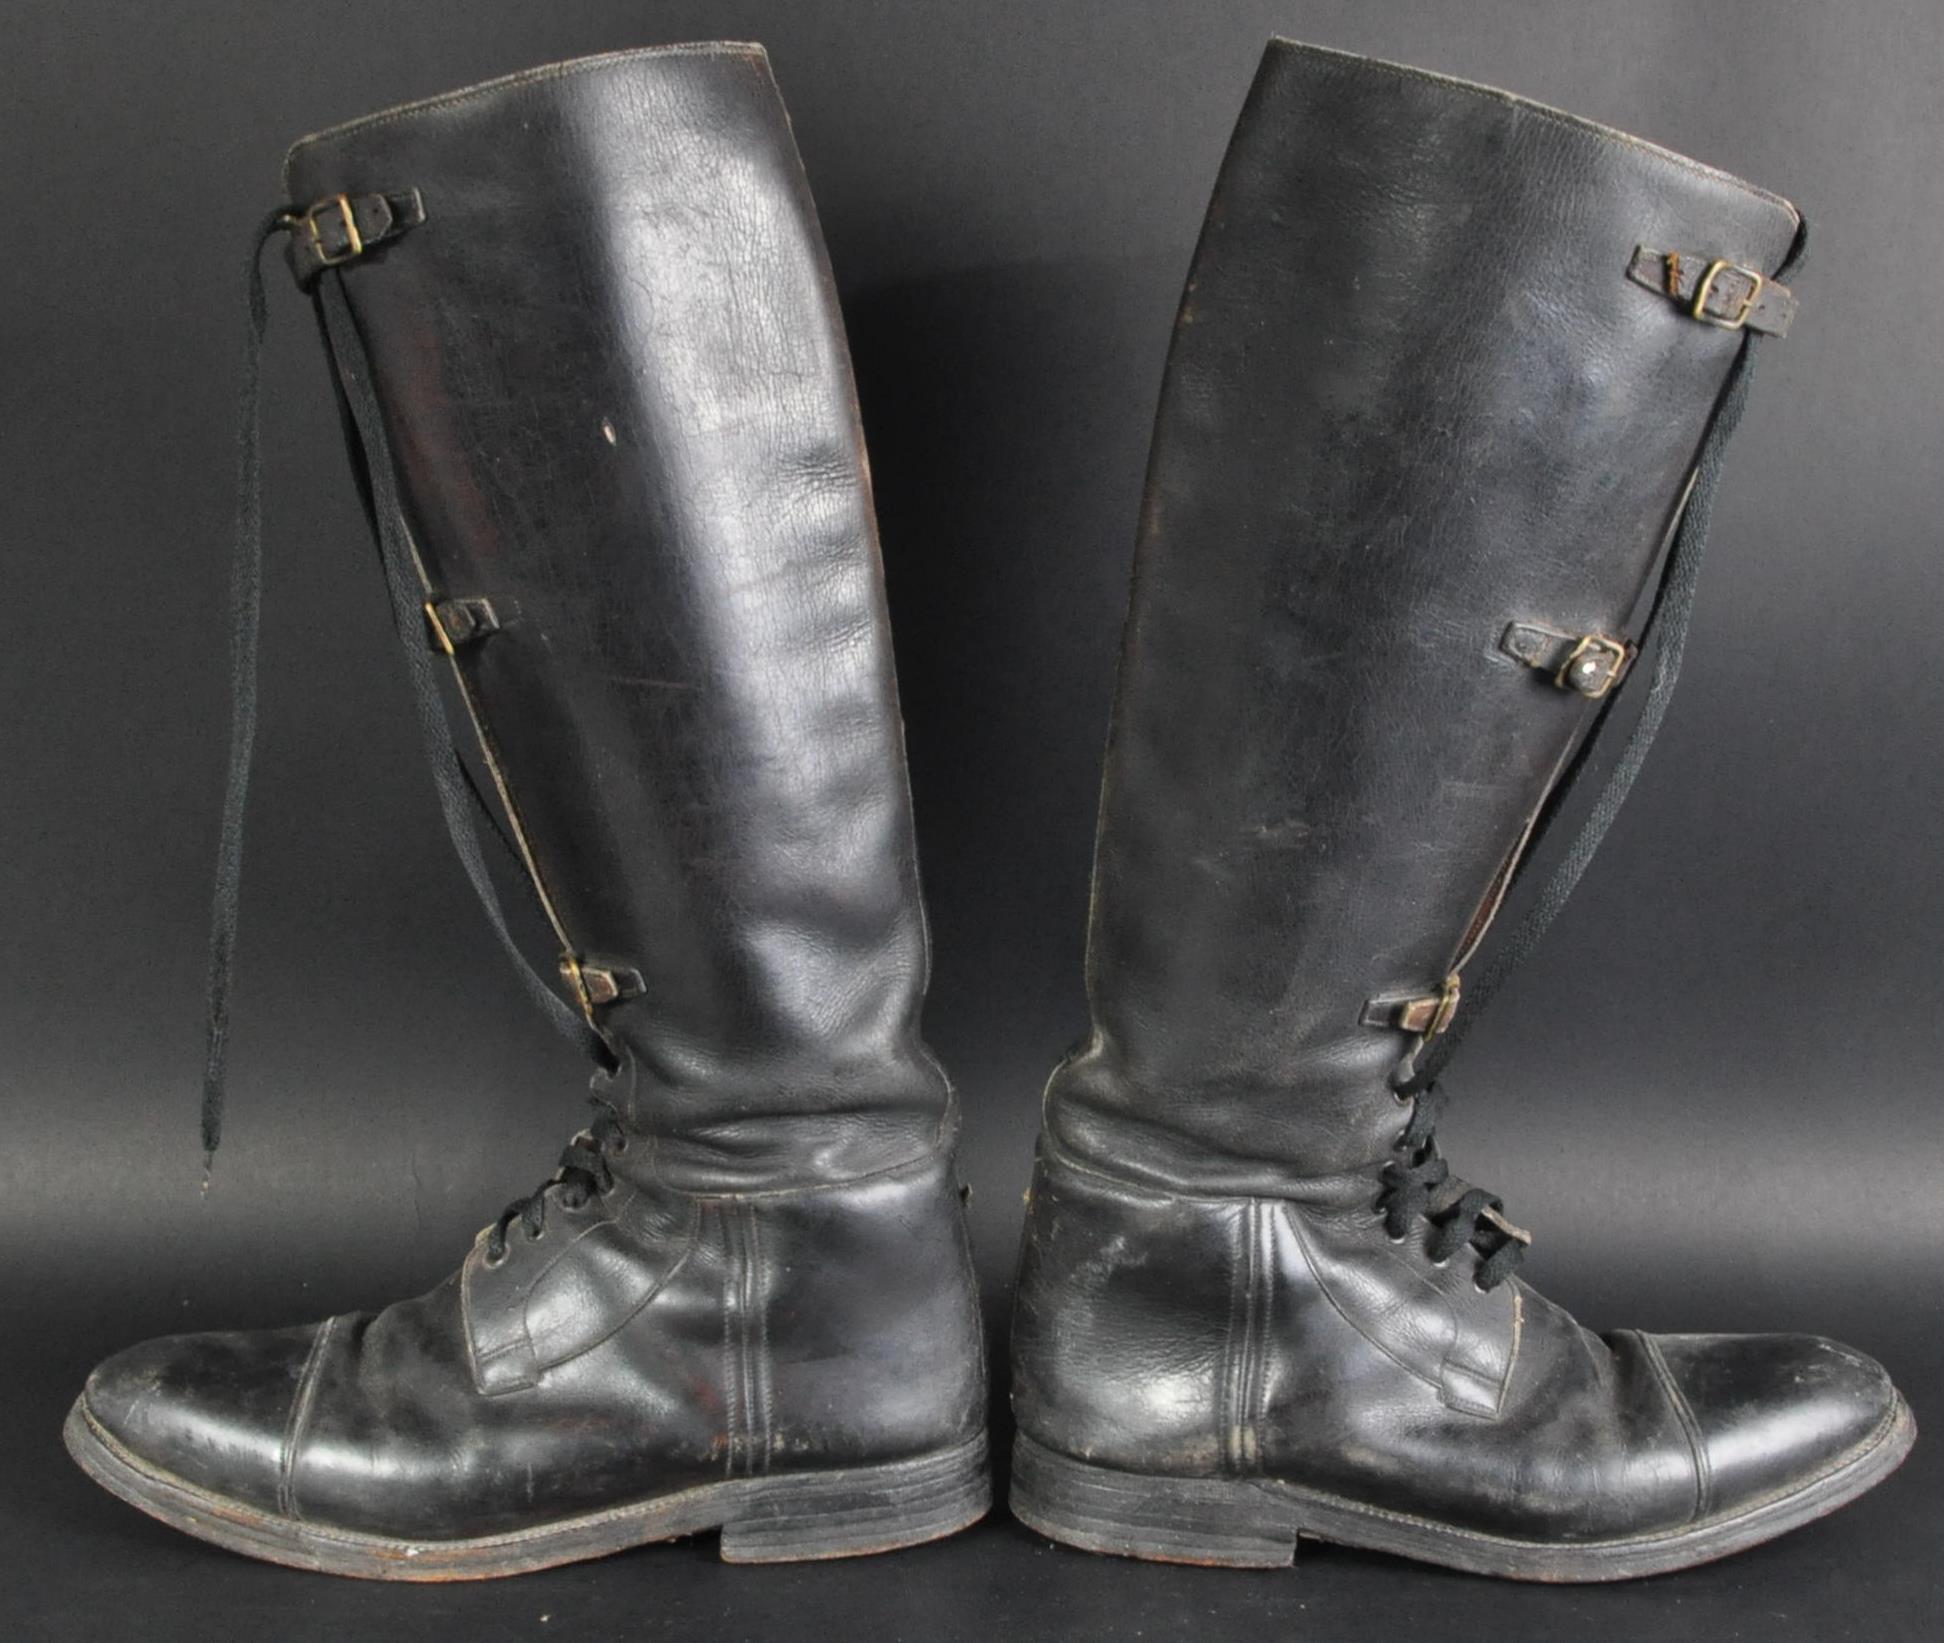 WWI FIRST WORLD WAR INTEREST - ROYAL FLYING CORPS BOOTS - Image 4 of 6